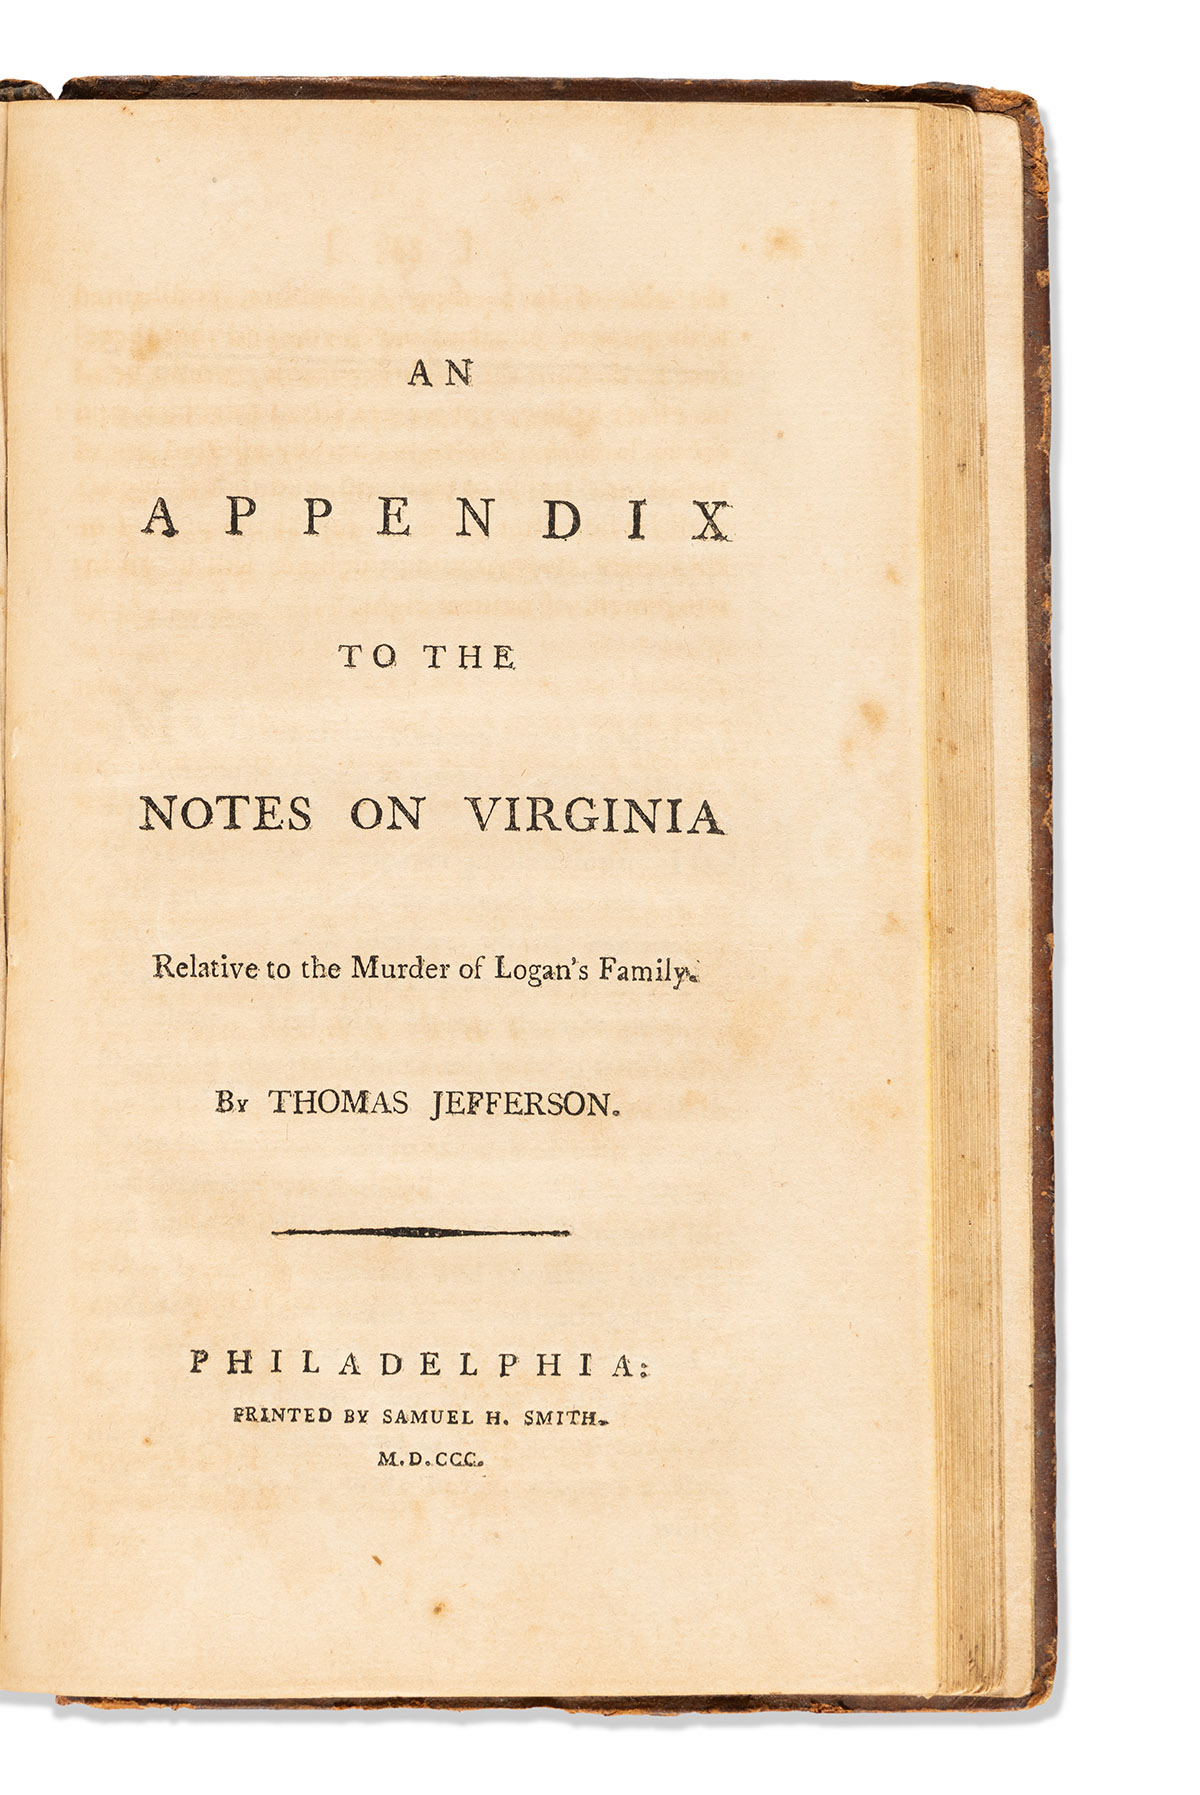 THOMAS JEFFERSON. An Appendix to the Notes on Virginia, Relative to the Murder of Logans Family.